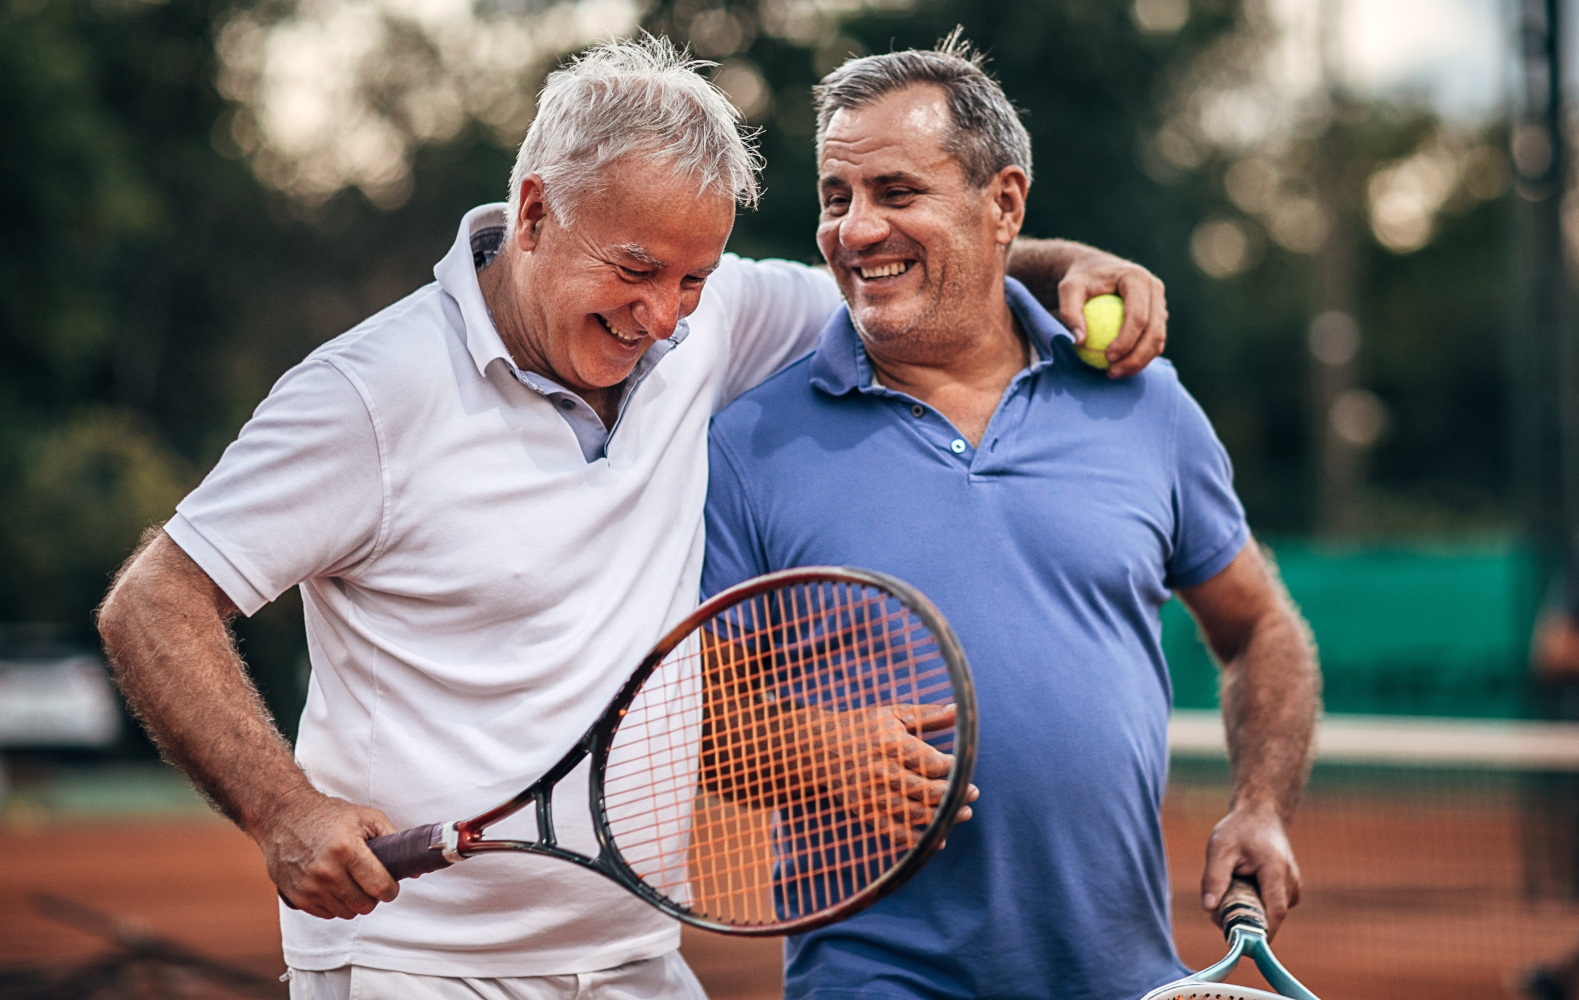 Two active, middle aged men, enjoying tennis